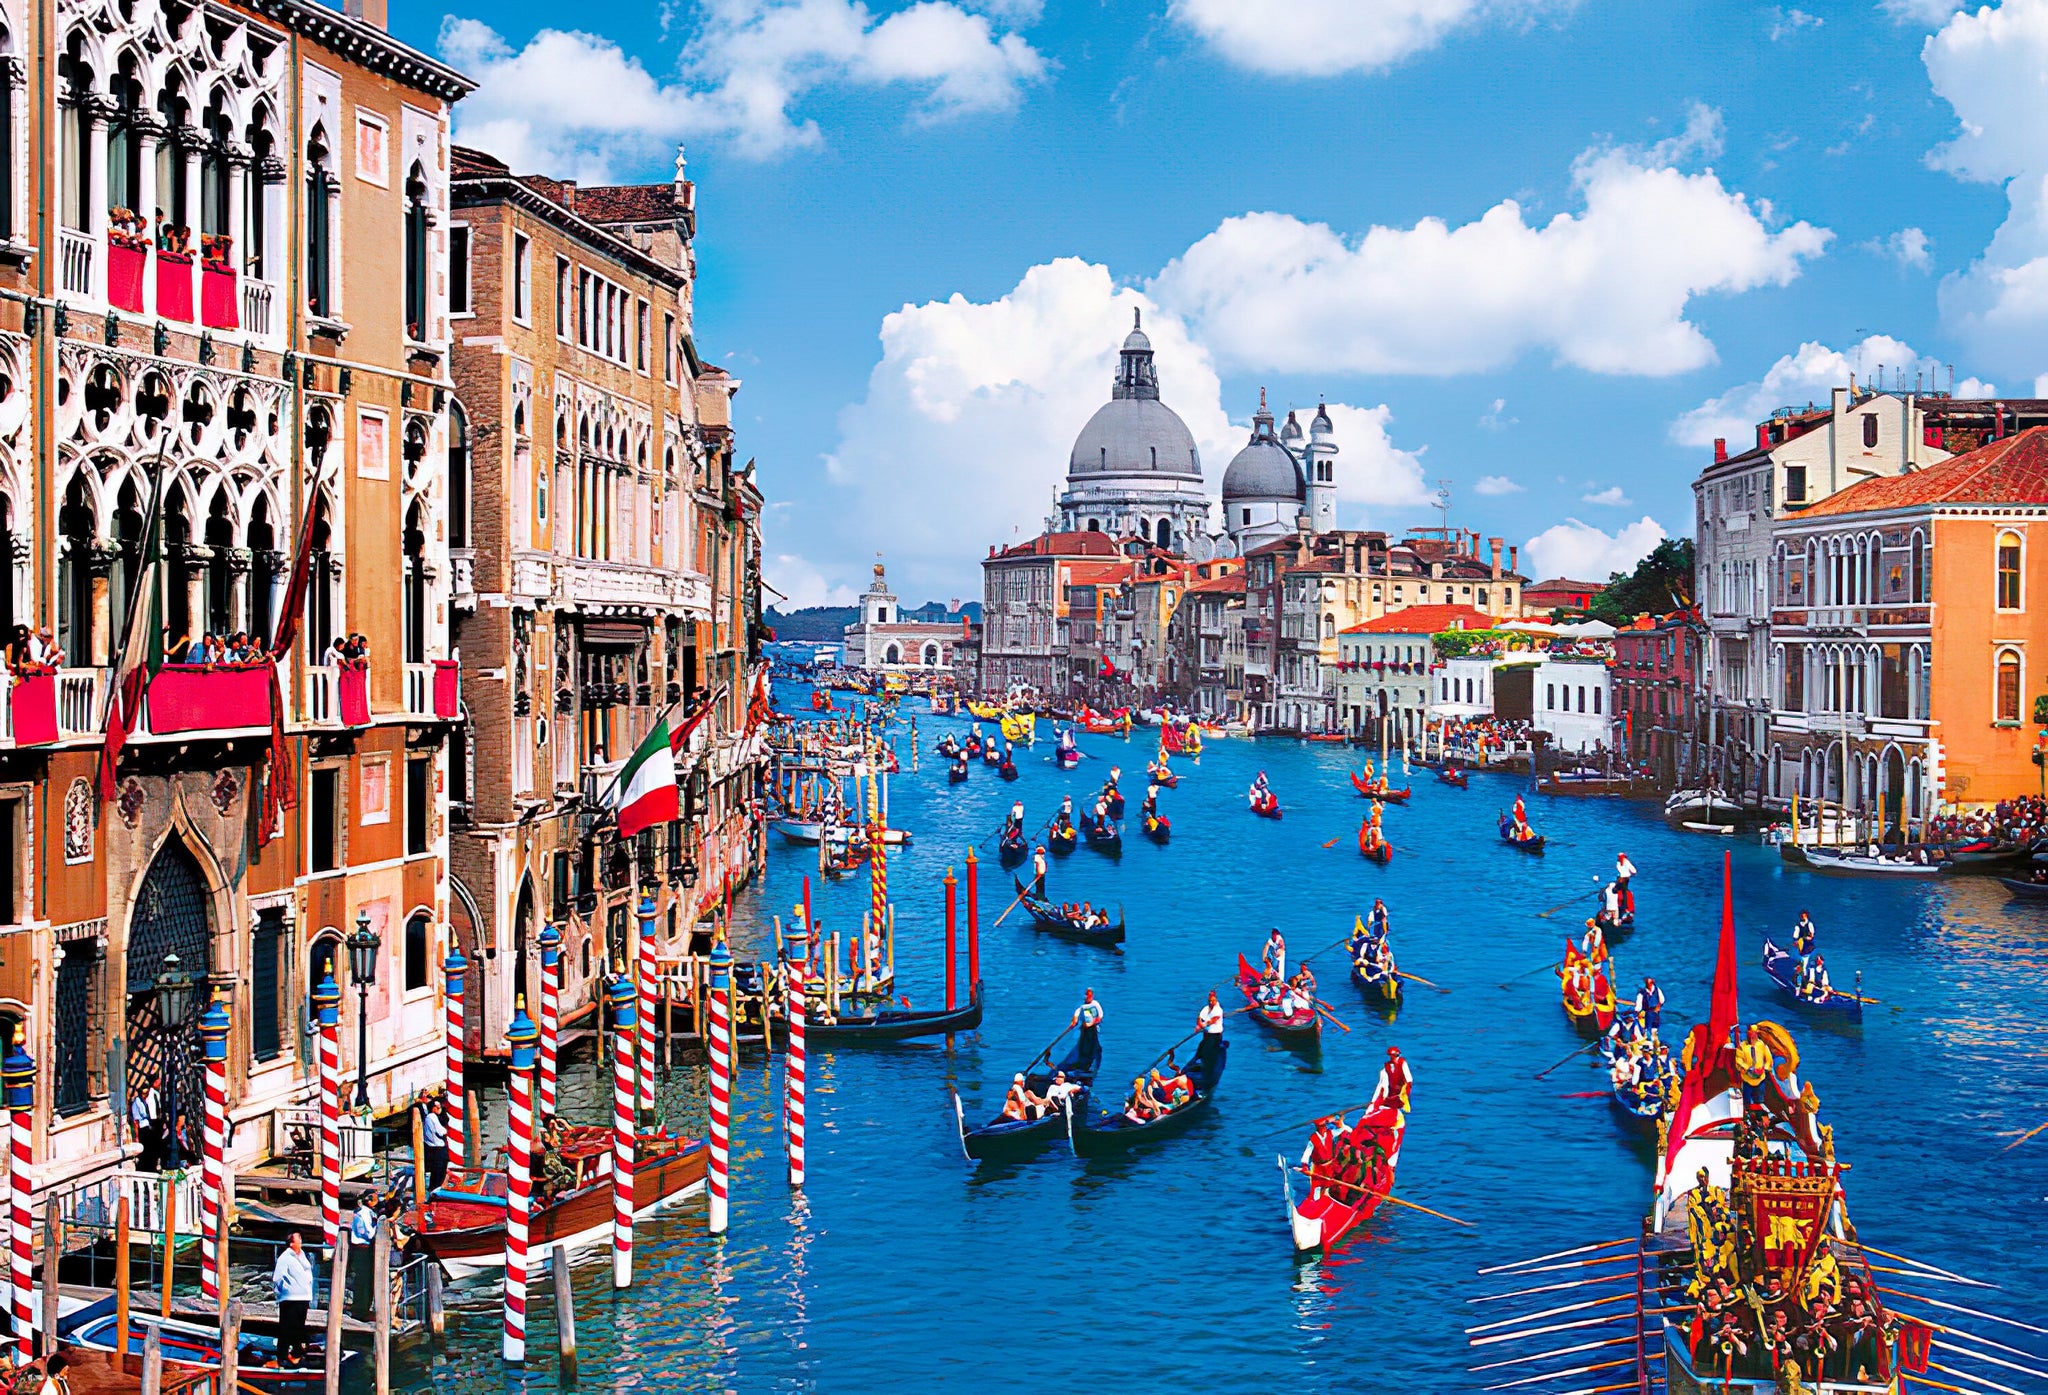 Beverly • Scenery • Venice, the City of Water　2000 PCS　Jigsaw Puzzle